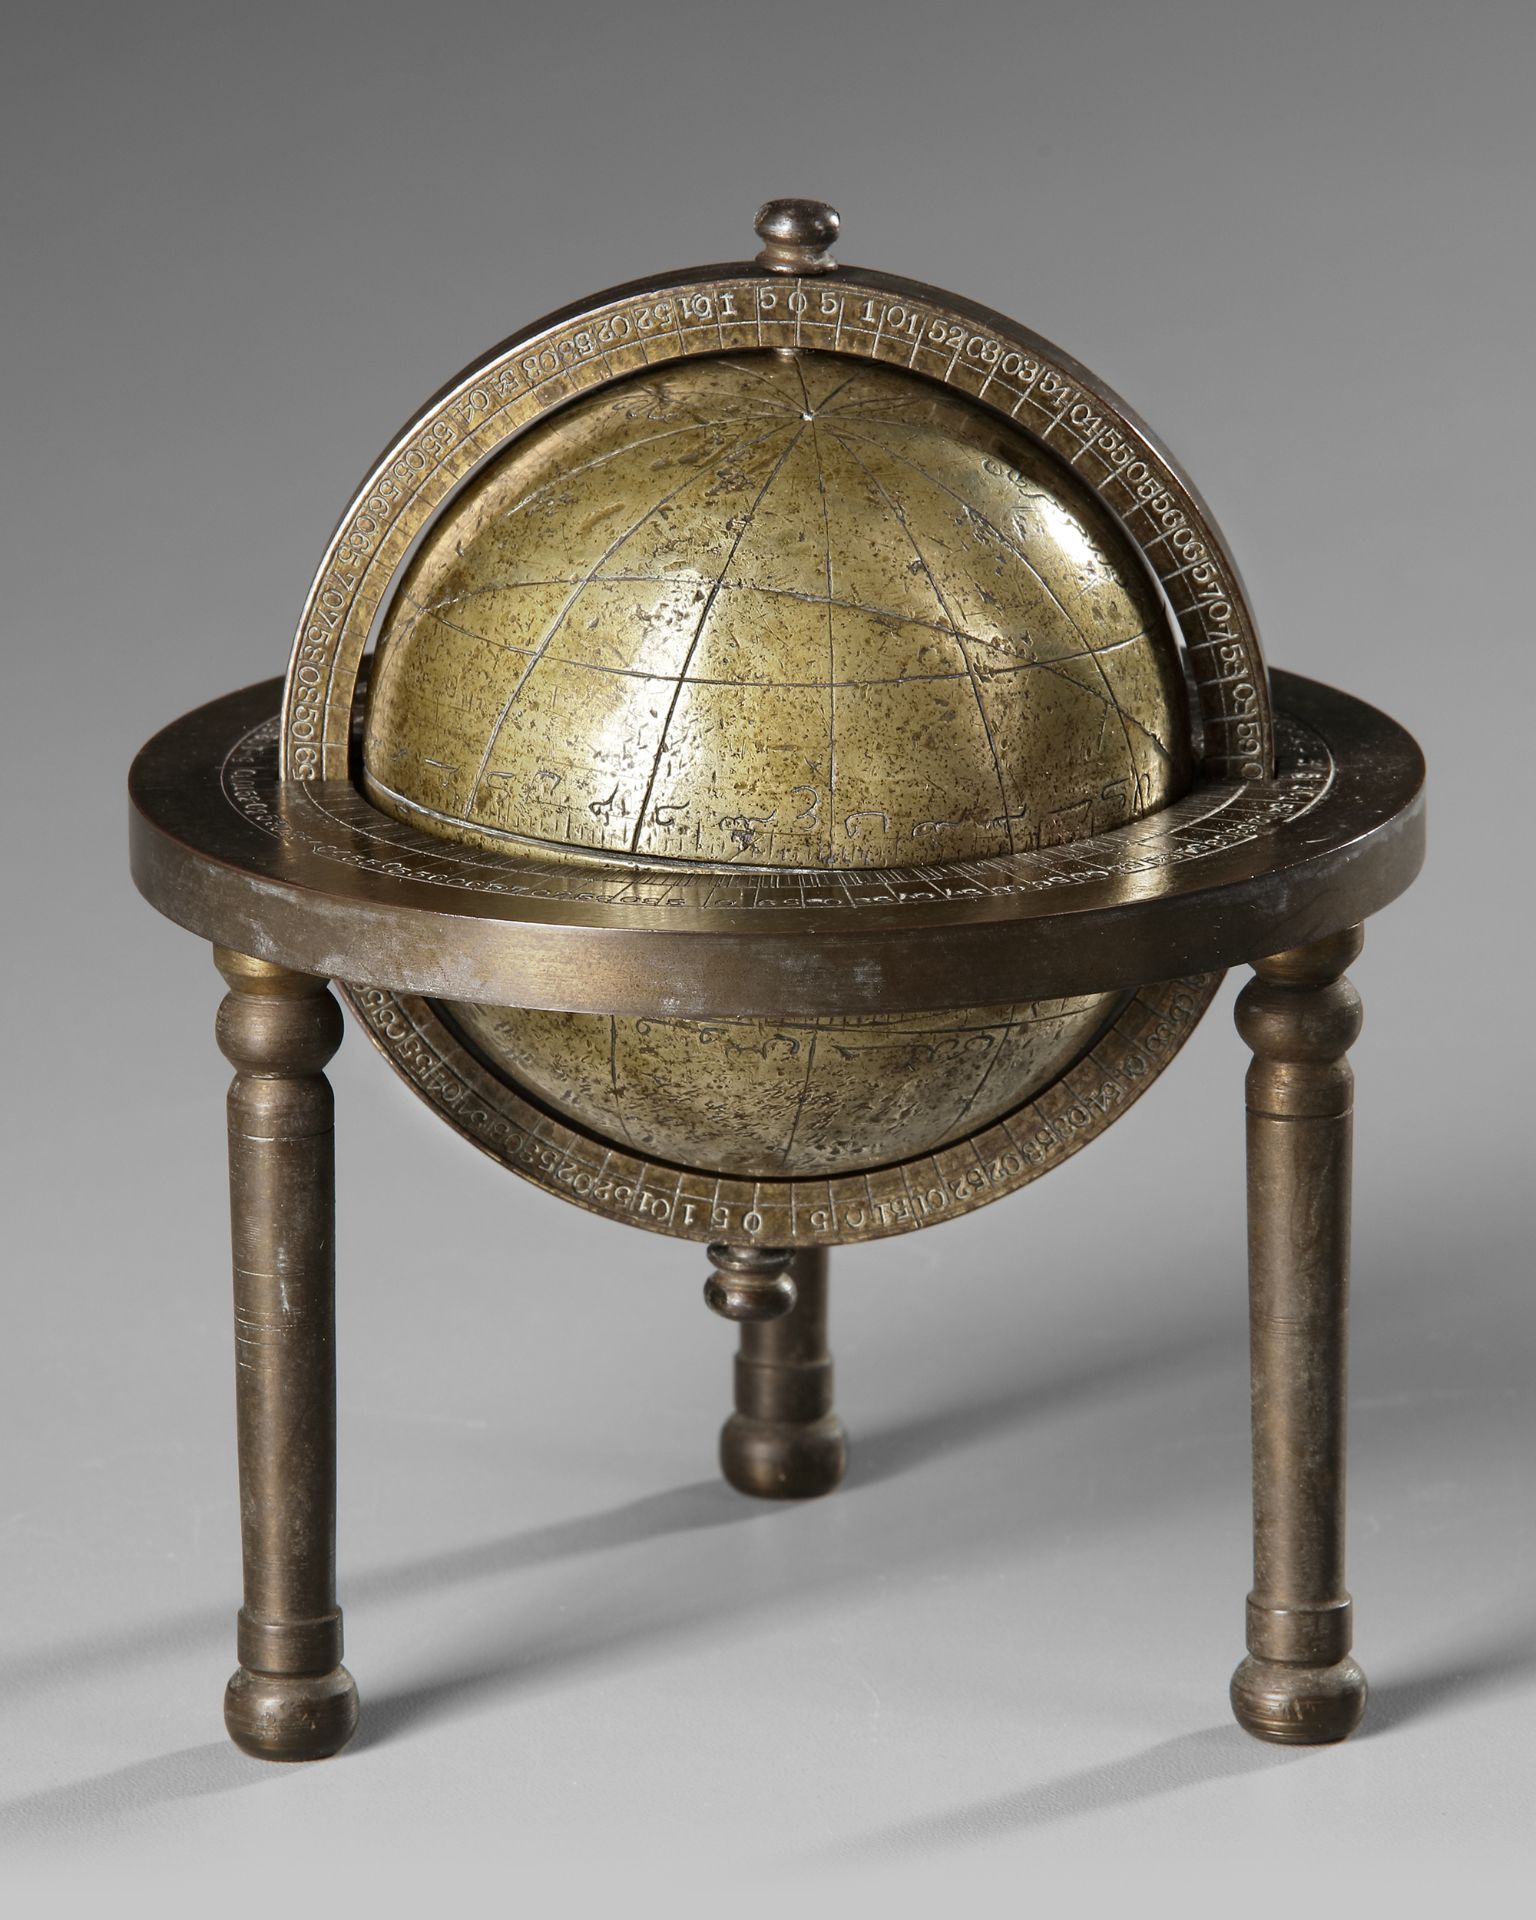 AN INDO-PERSIAN BRASS EASTERN ISLAMIC CELESTIAL GLOBE, INDO-PERSIAN LATE 17TH-EARLY 18TH CENTURY - Image 2 of 3